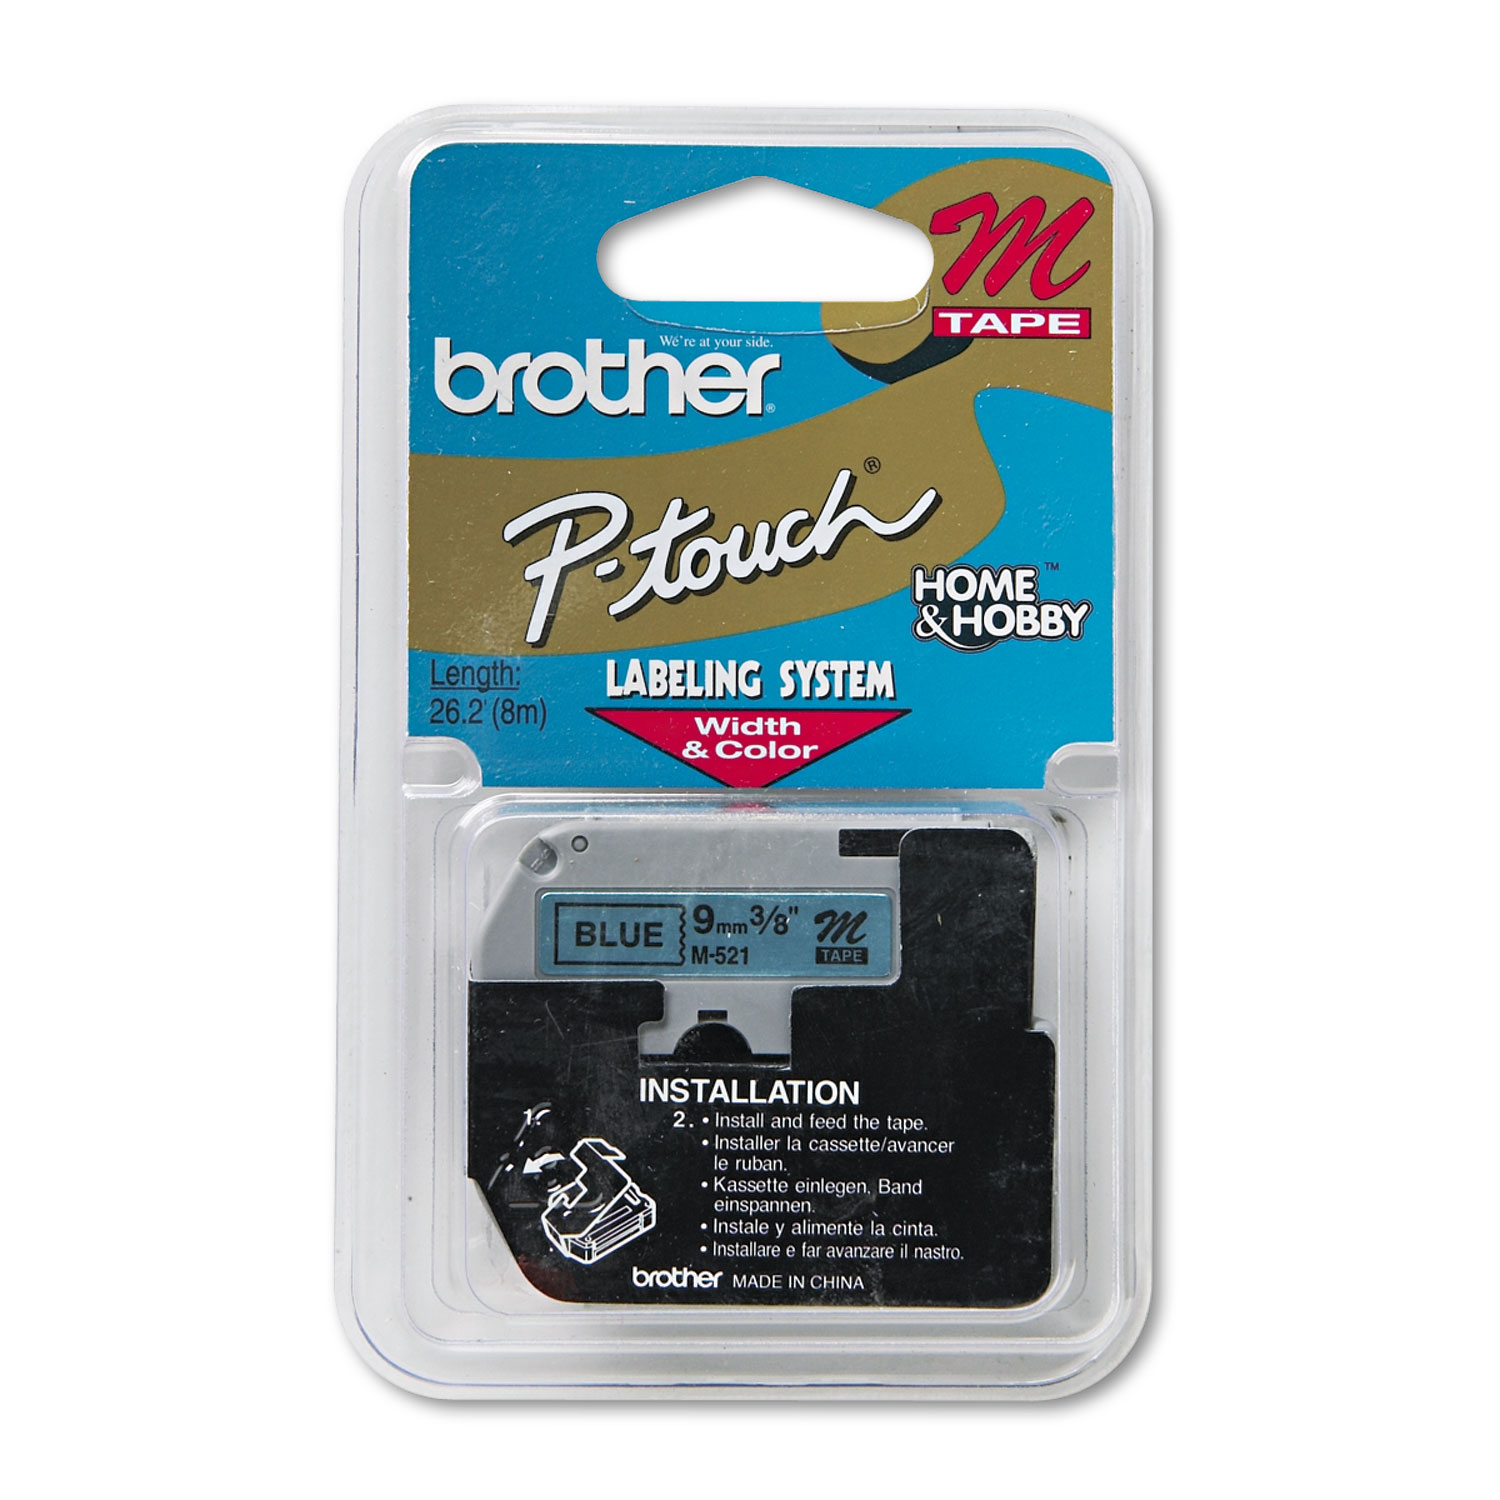  Brother P-Touch M521 M Series Tape Cartridge for P-Touch Labelers, 0.35 x 26.2 ft, Black on Blue (BRTM521) 